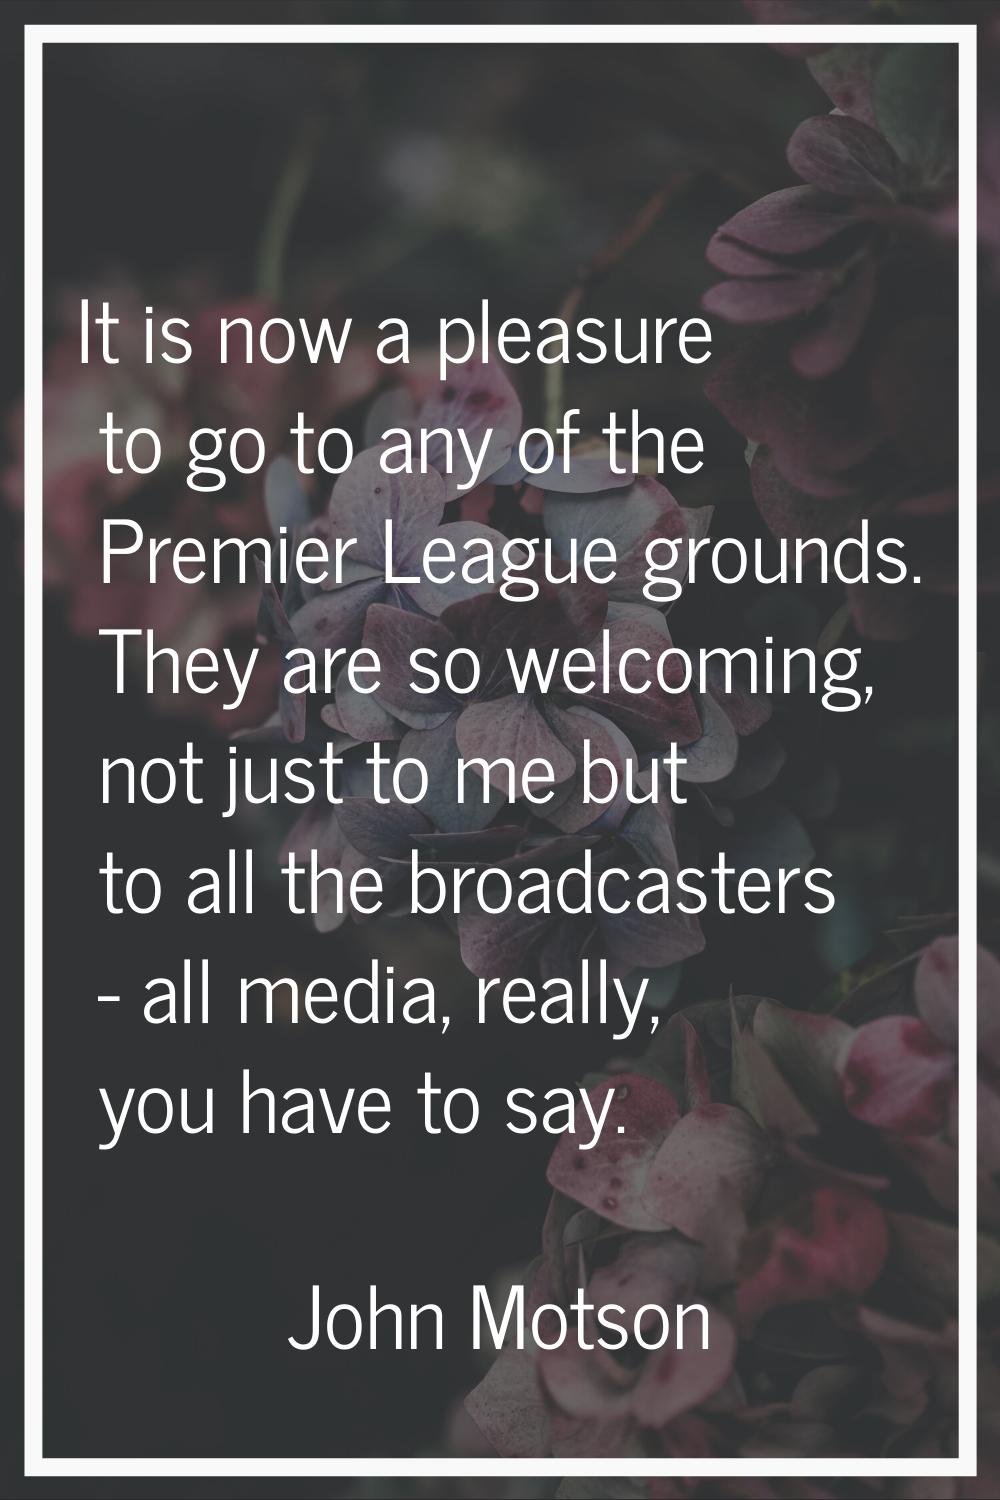 It is now a pleasure to go to any of the Premier League grounds. They are so welcoming, not just to